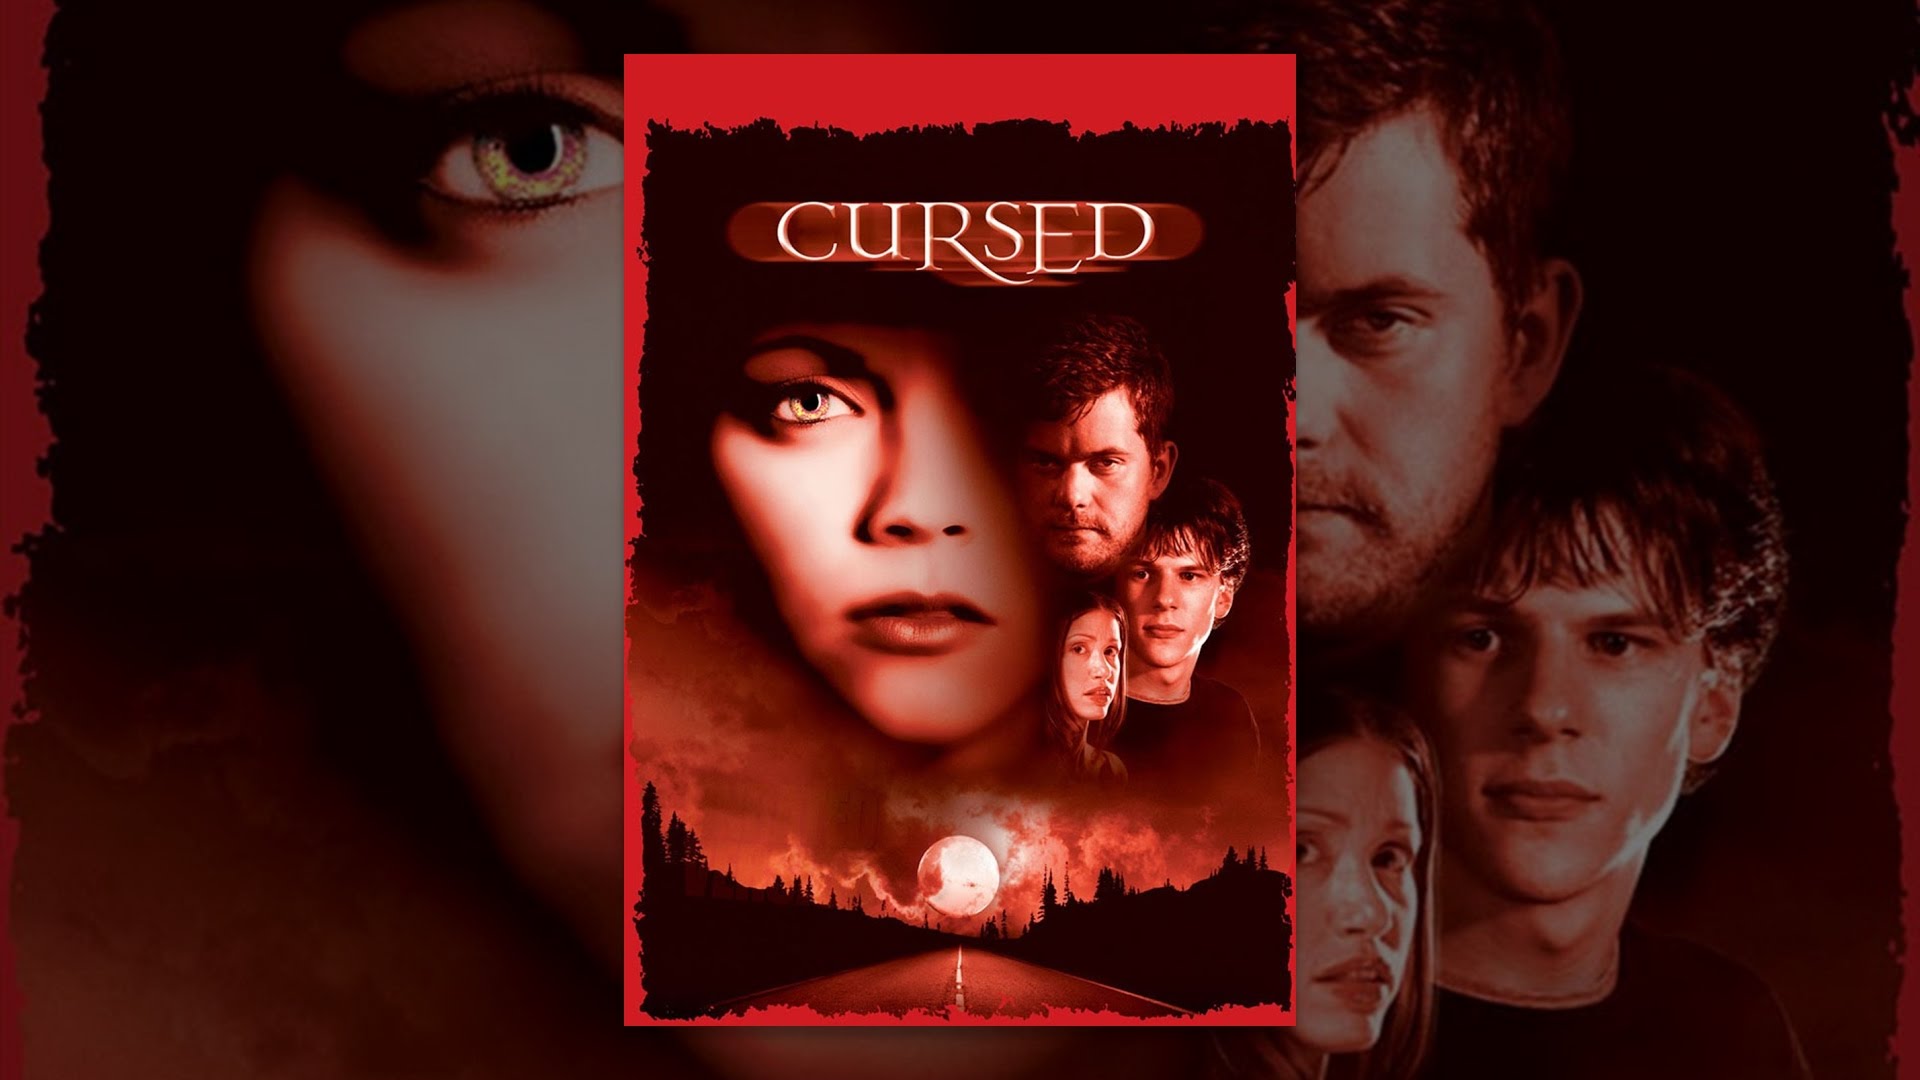  Cursed is a 2005 American supernatural horror film about a cursed artifact that brings misfortune to its owner.